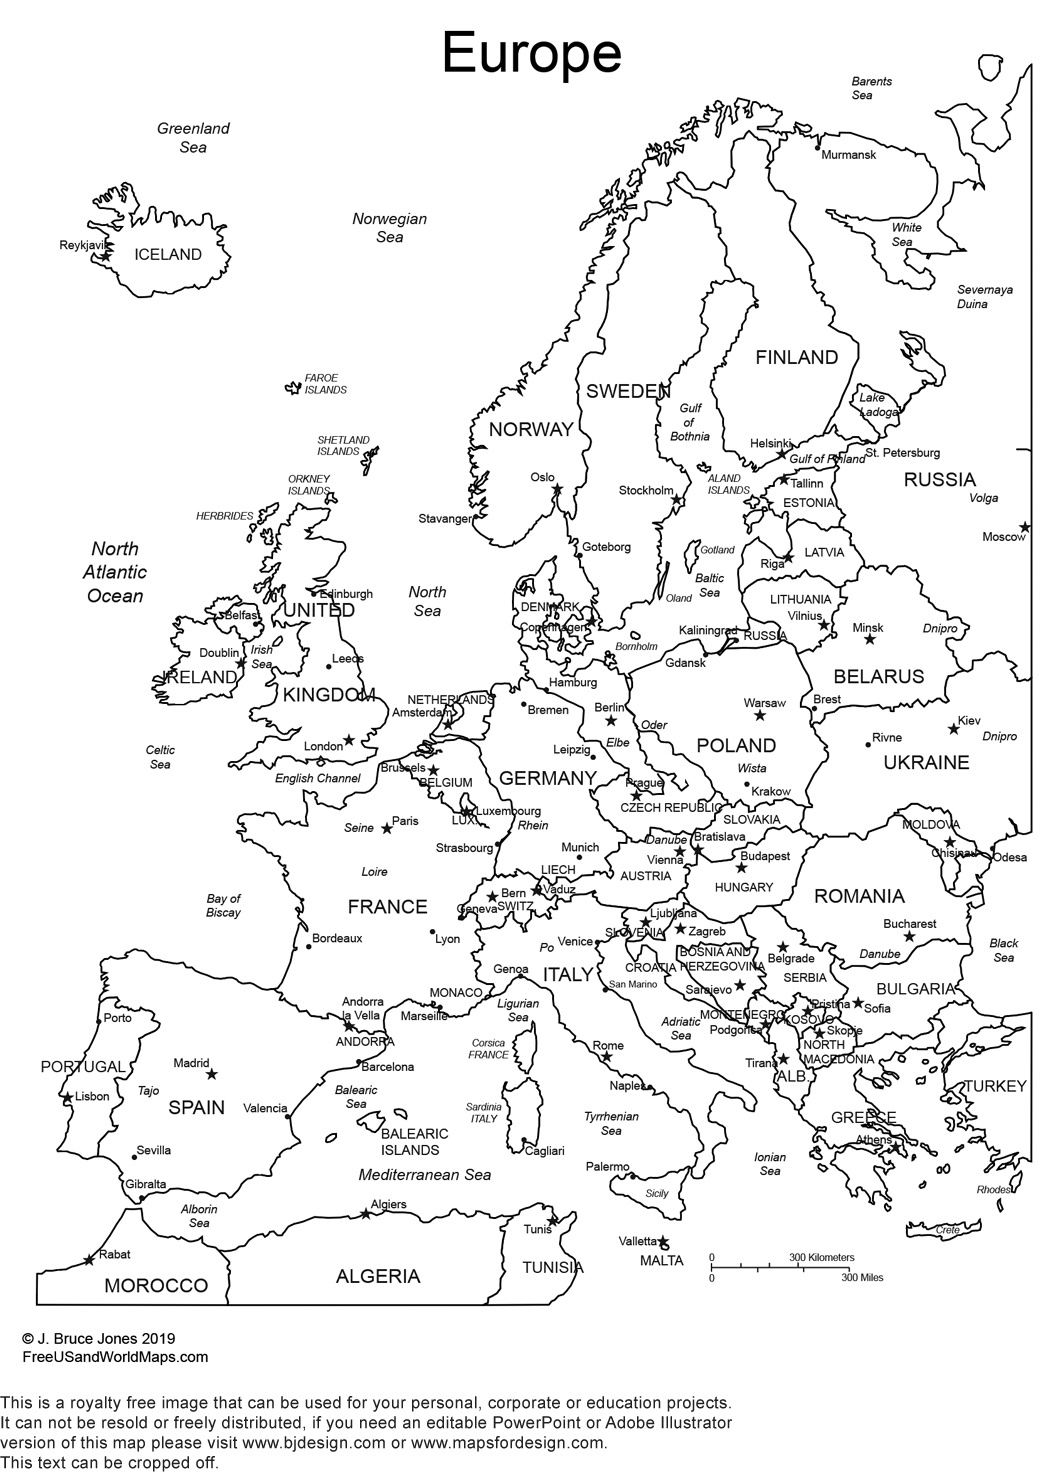 World Regional Printable, Blank Maps • Royalty Free, Jpg - Free Printable Map Of Europe With Cities